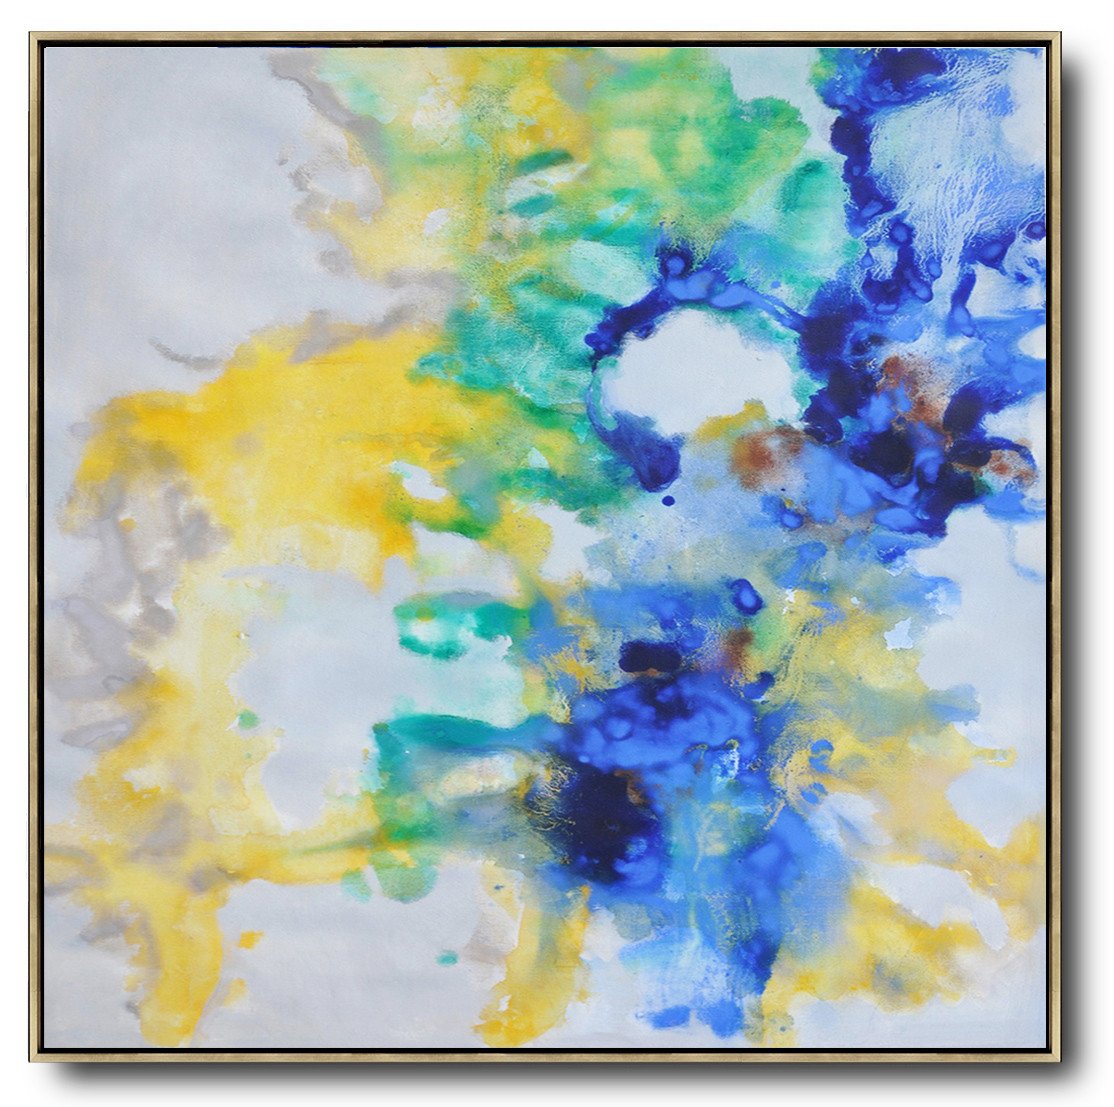 Hand-painted oversized Contemporary Oil Painting by Jackson abstract prints